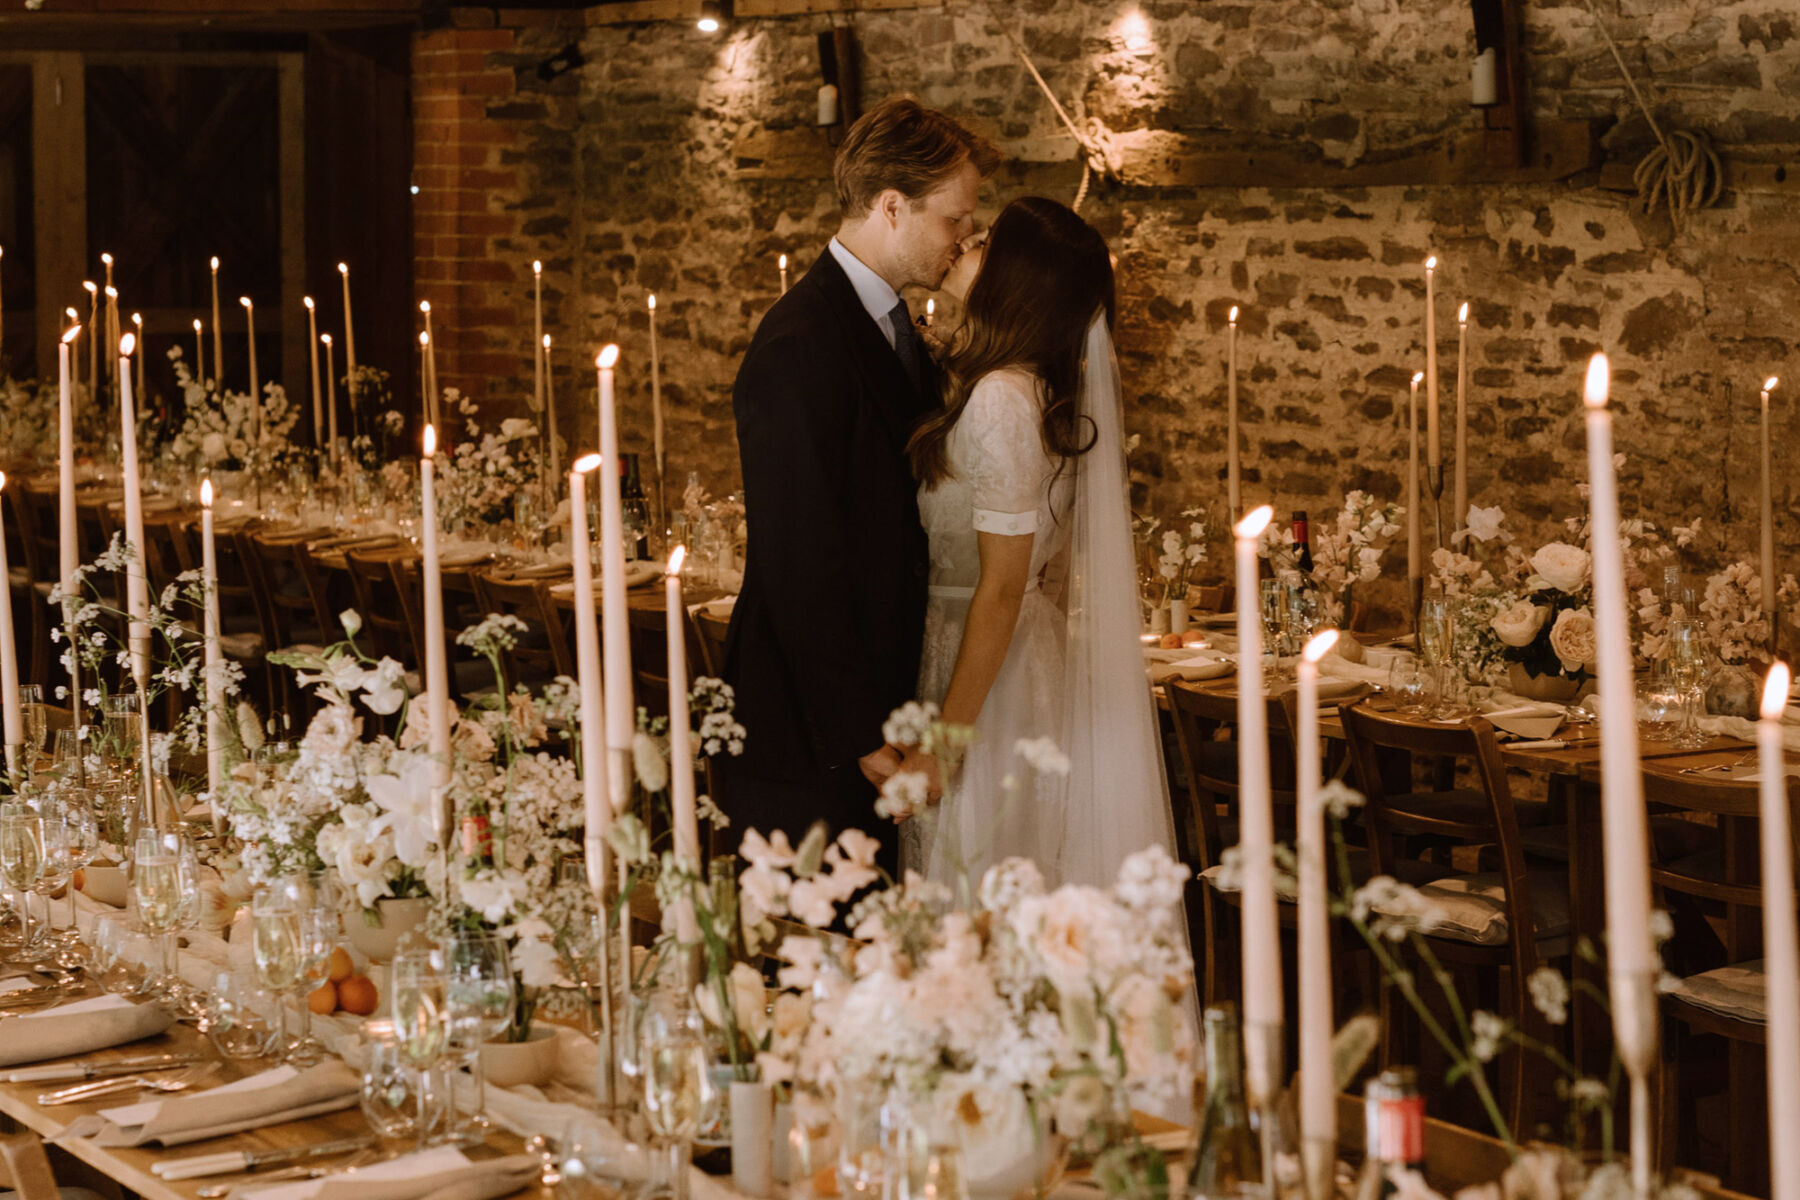 Candlelit and romantic wedding at Dewsall Court, country house wedding venue in Herefordshire